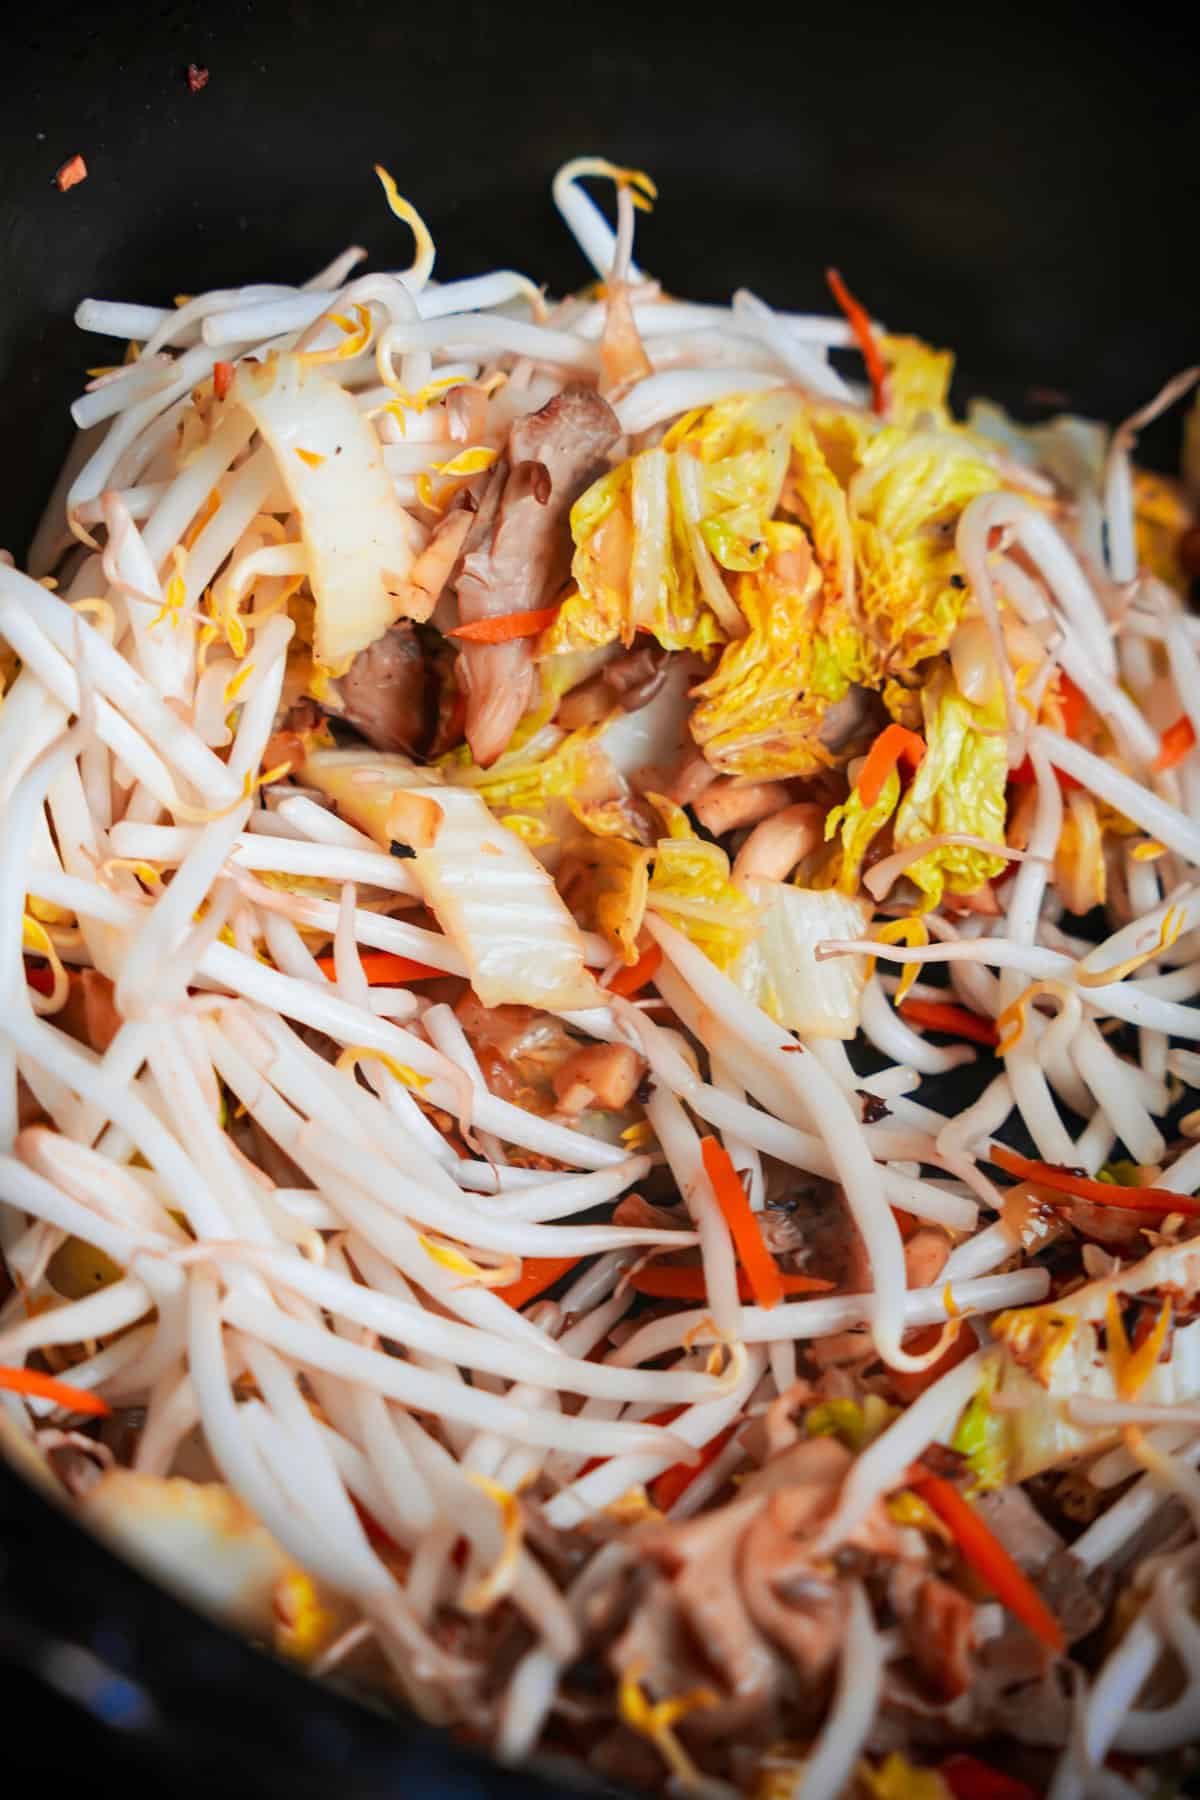 Bean sprouts are stirred into the stir-frying veggies in the pan.